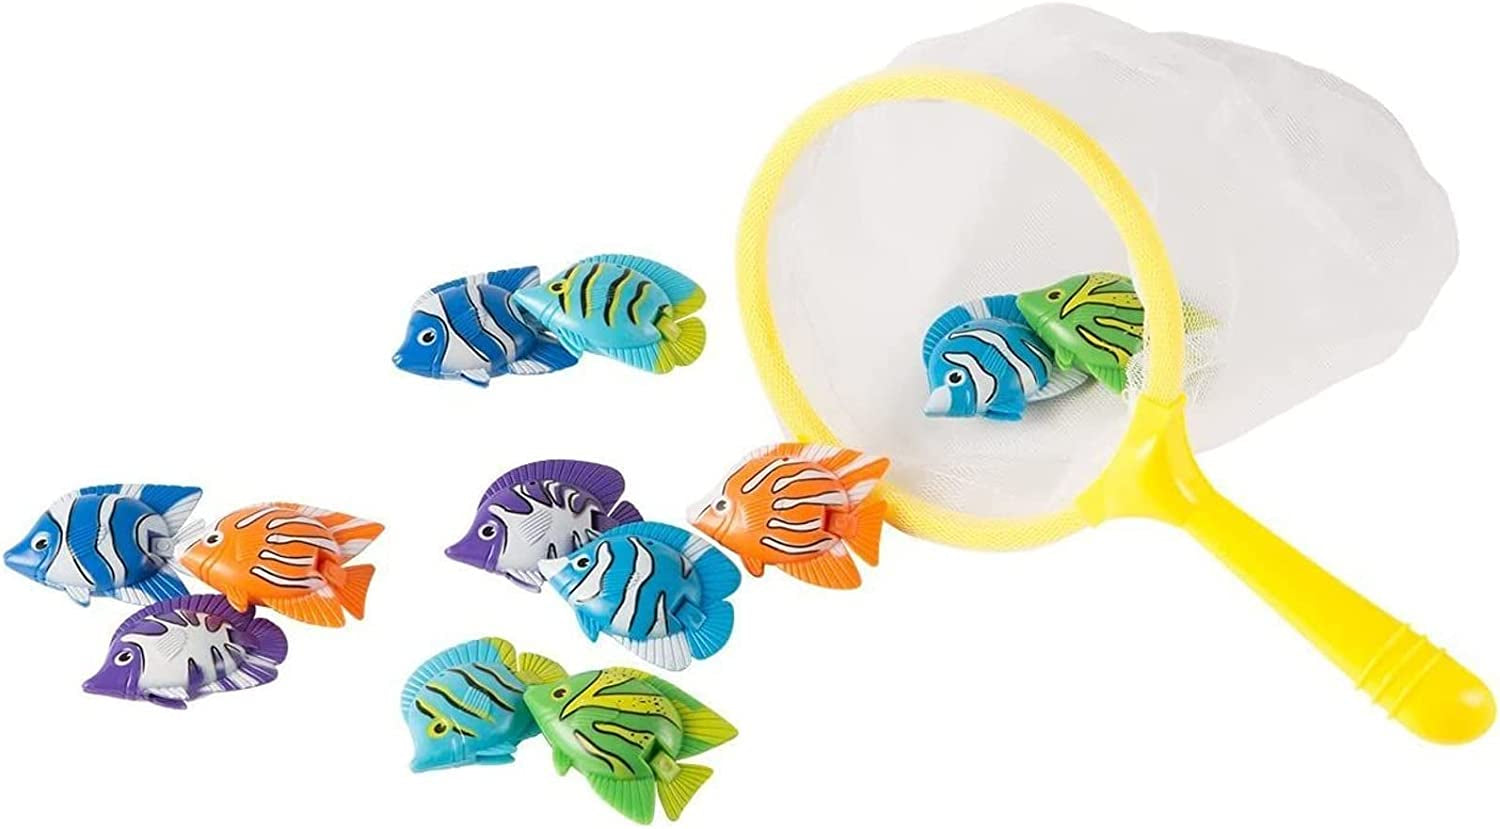 BLUE PANDA Swim Dive Toys, Kid Pool Games, 12 Fish Rings for Diving with Net (13 Pieces)